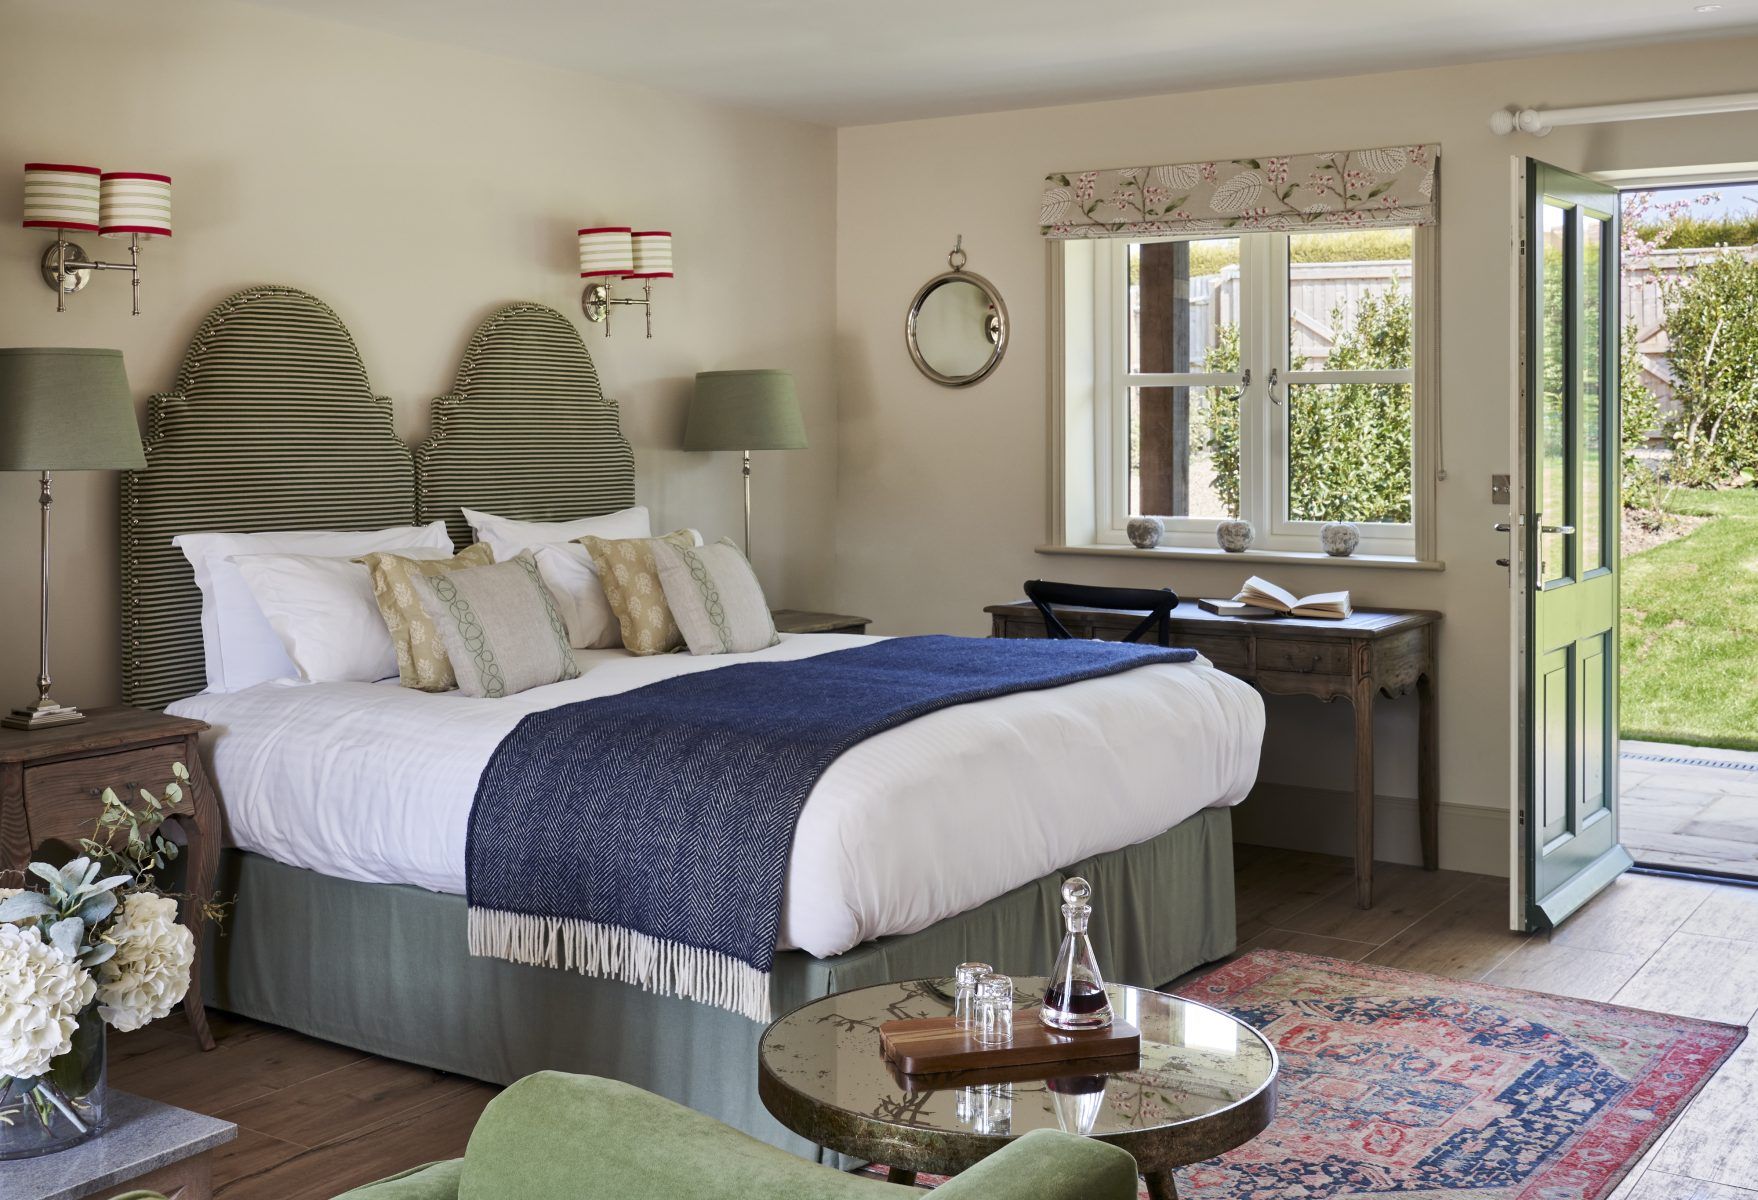 The Montagu Arms courtyard bedroom